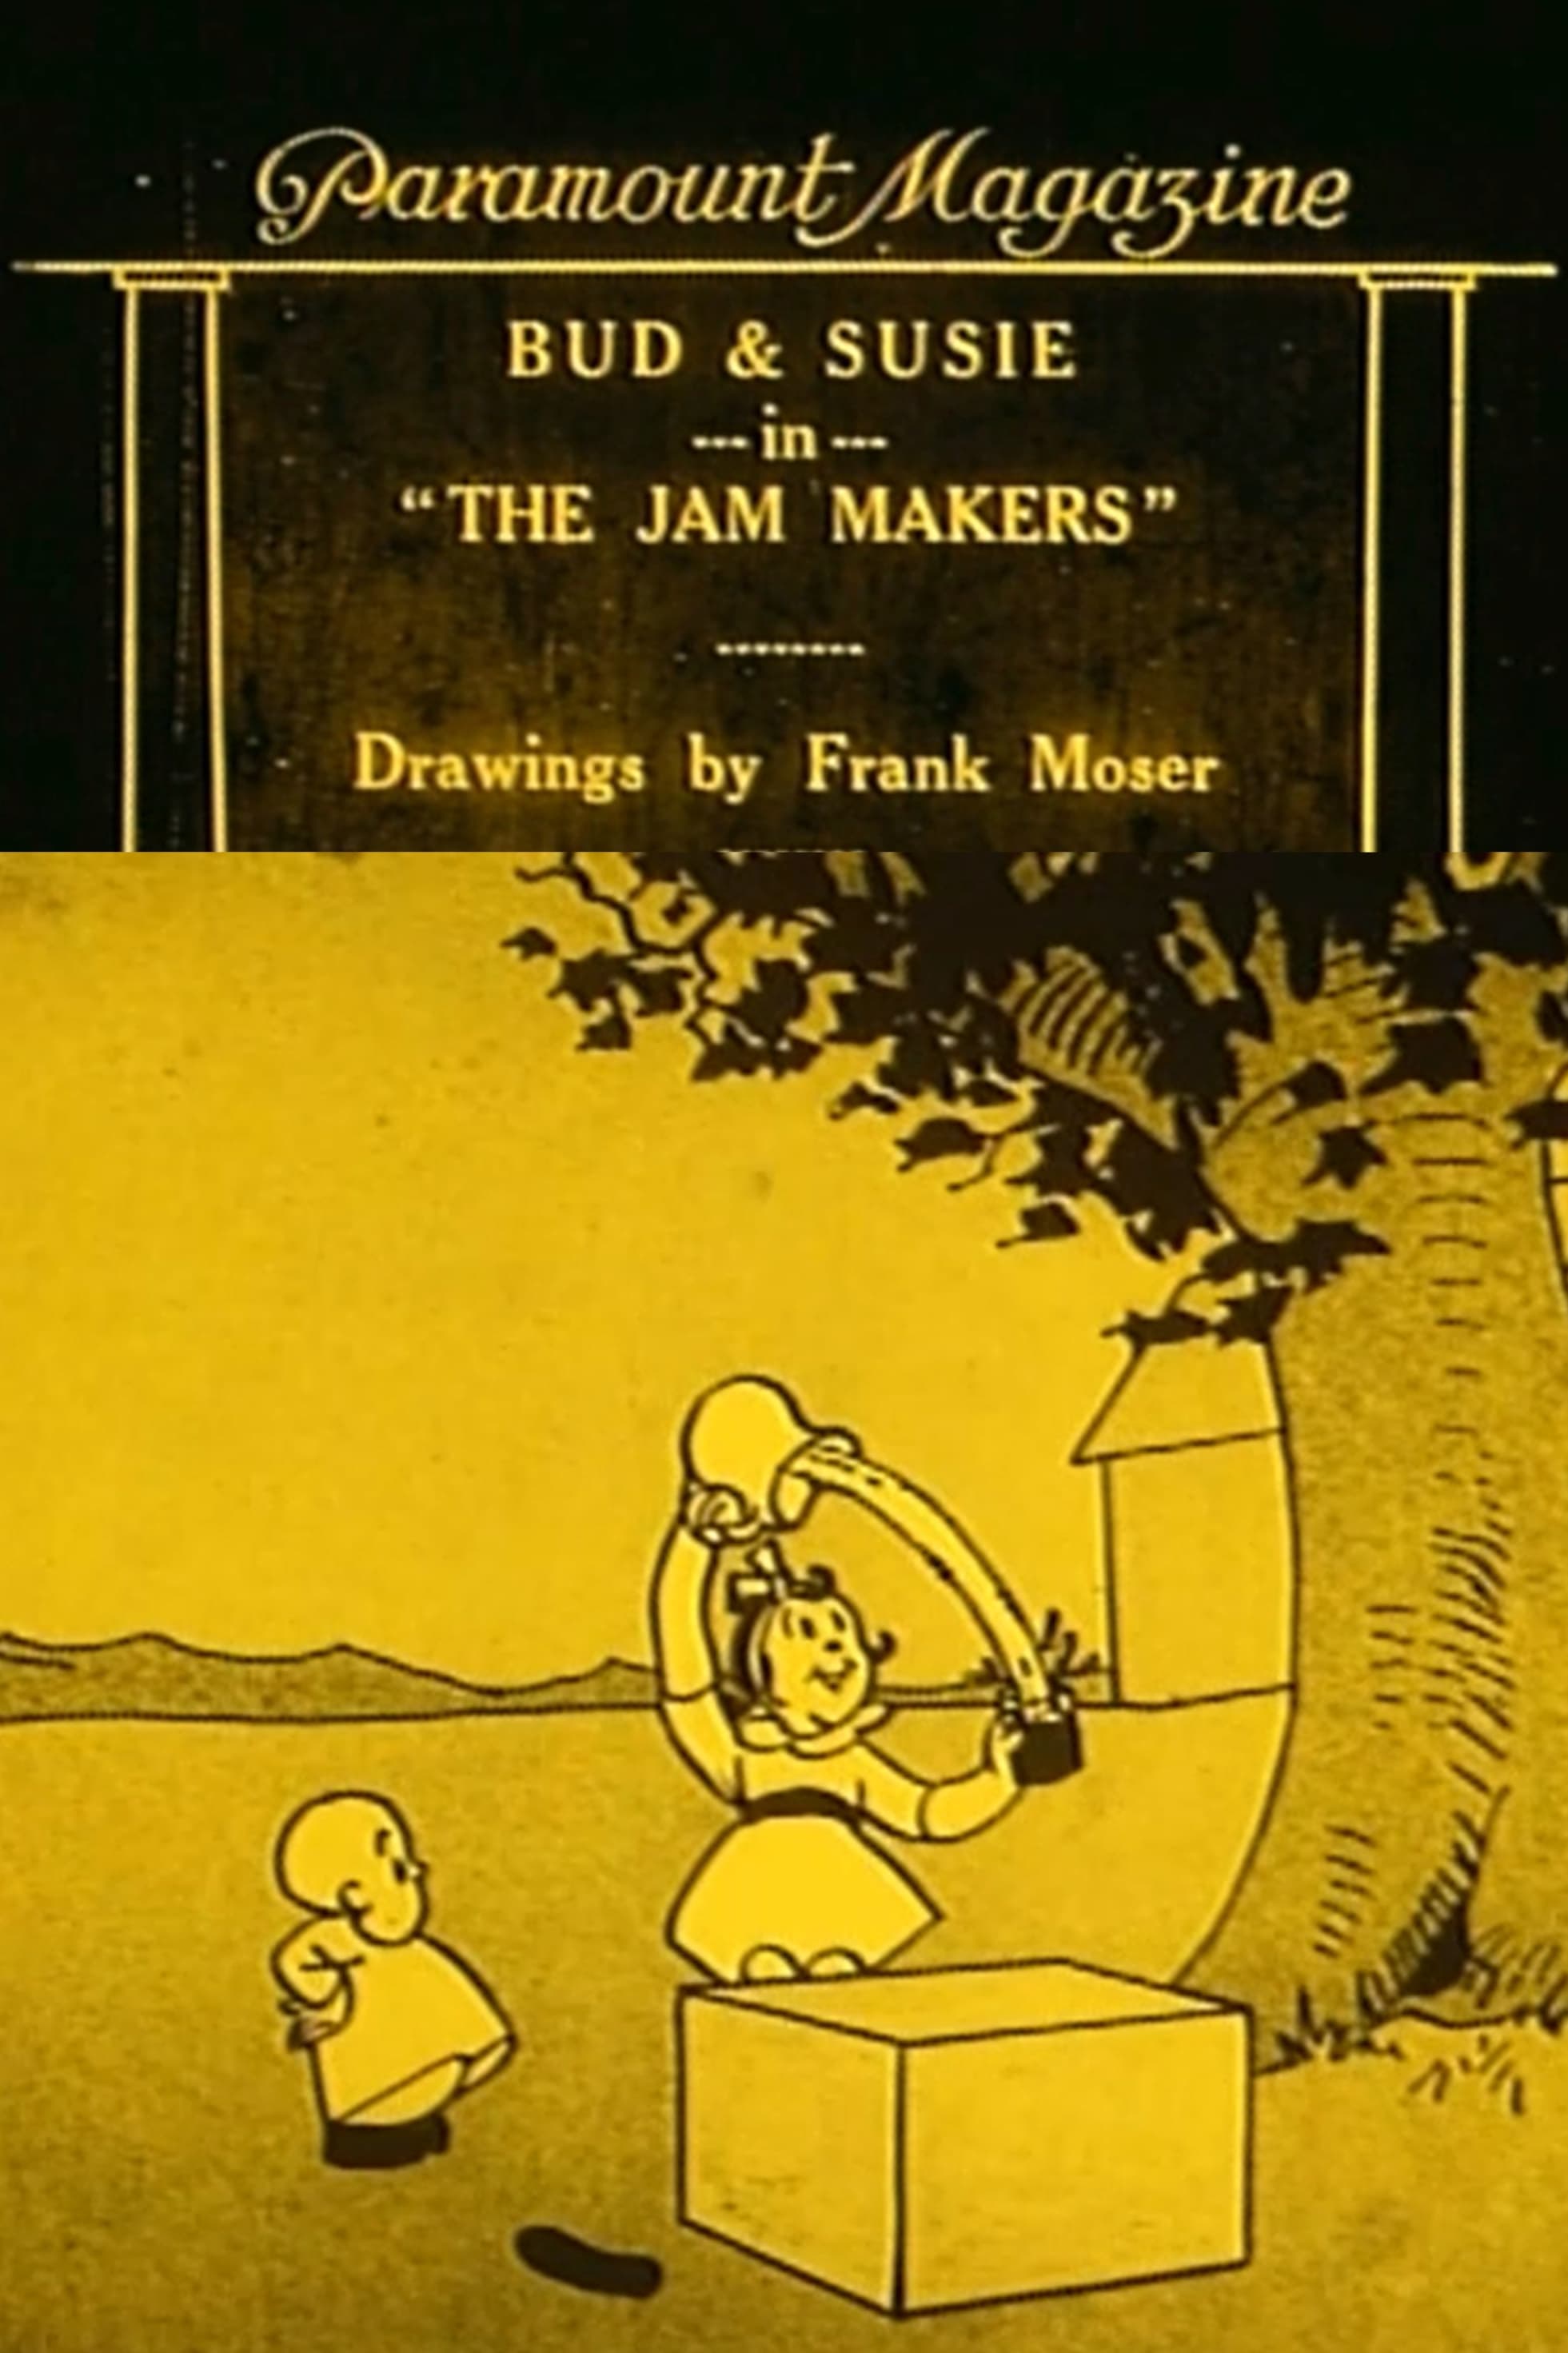 The Jam Makers